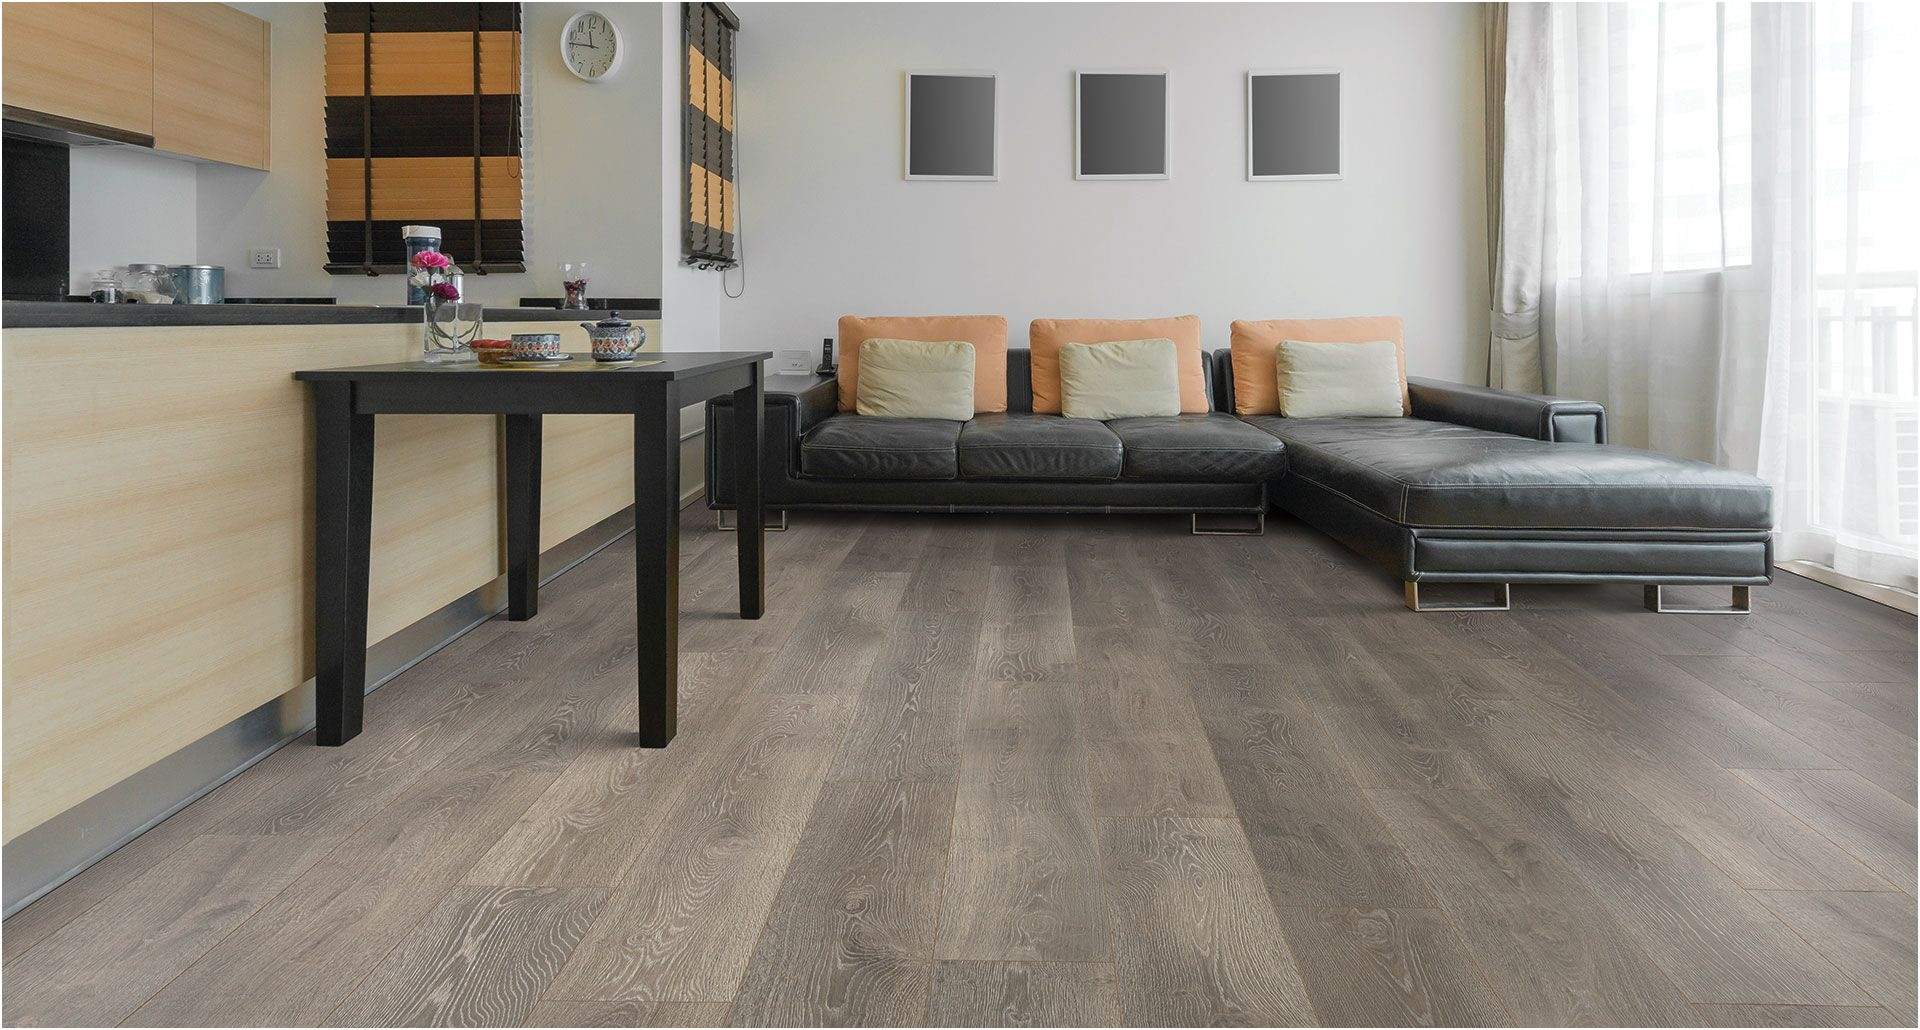 unfinished oak hardwood flooring cost of lowes hardwood flooring installation cost beautiful harbor view oak pertaining to lowes hardwood flooring installation cost beautiful harbor view oak laminate flooring from pergo timbercraft